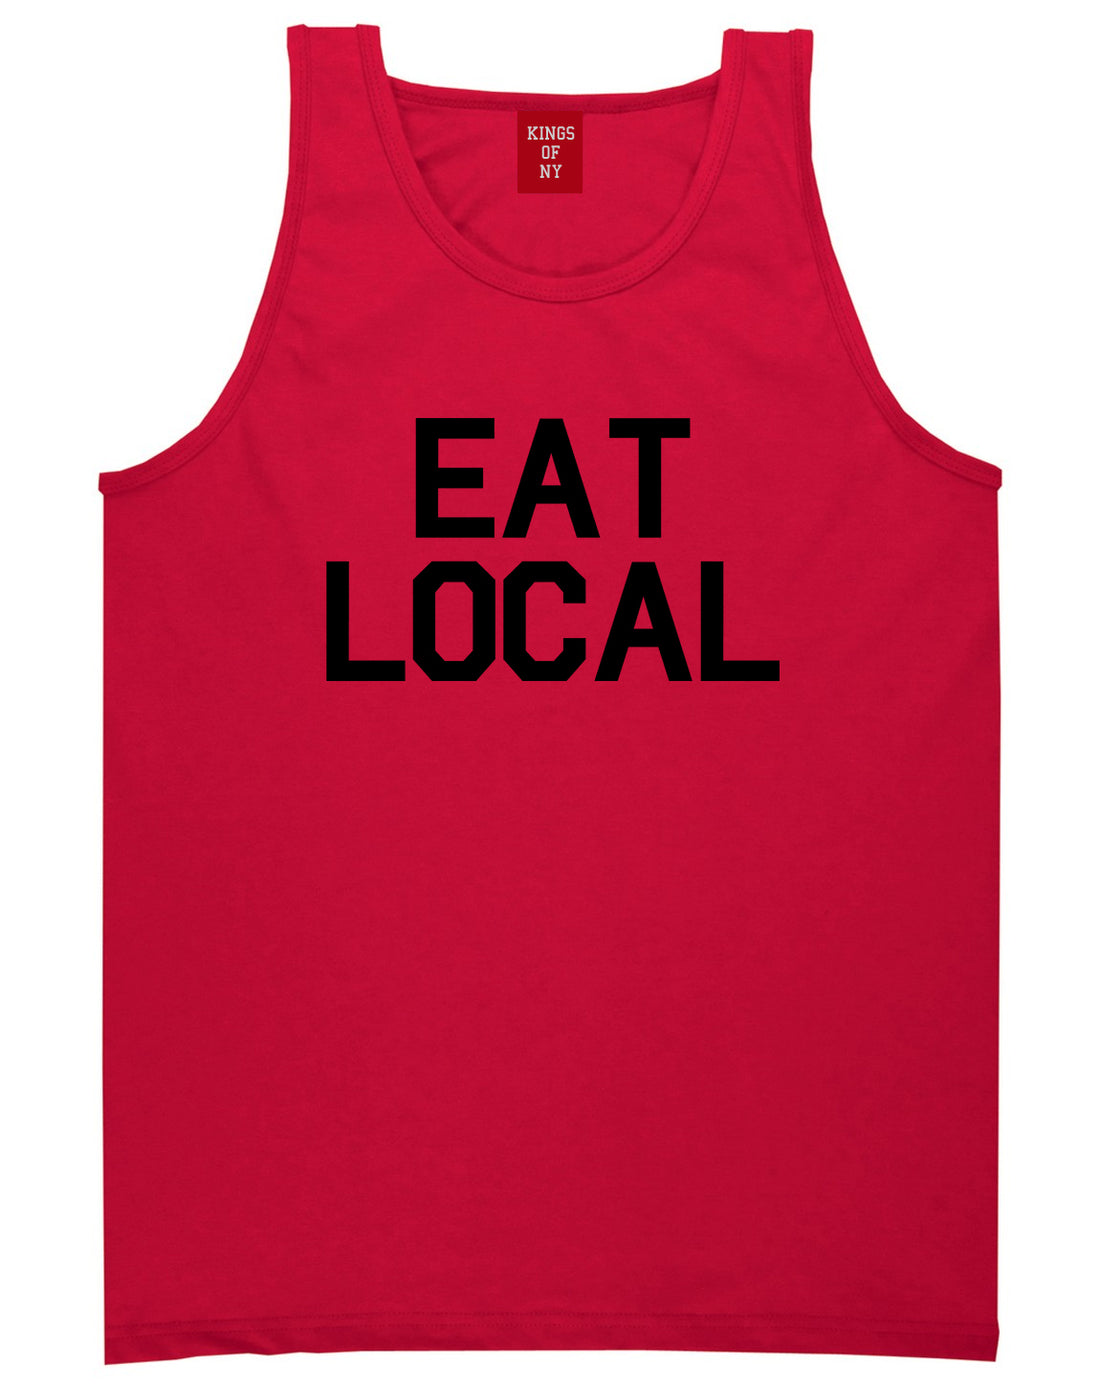 Eat_Local_Buy Mens Red Tank Top Shirt by Kings Of NY